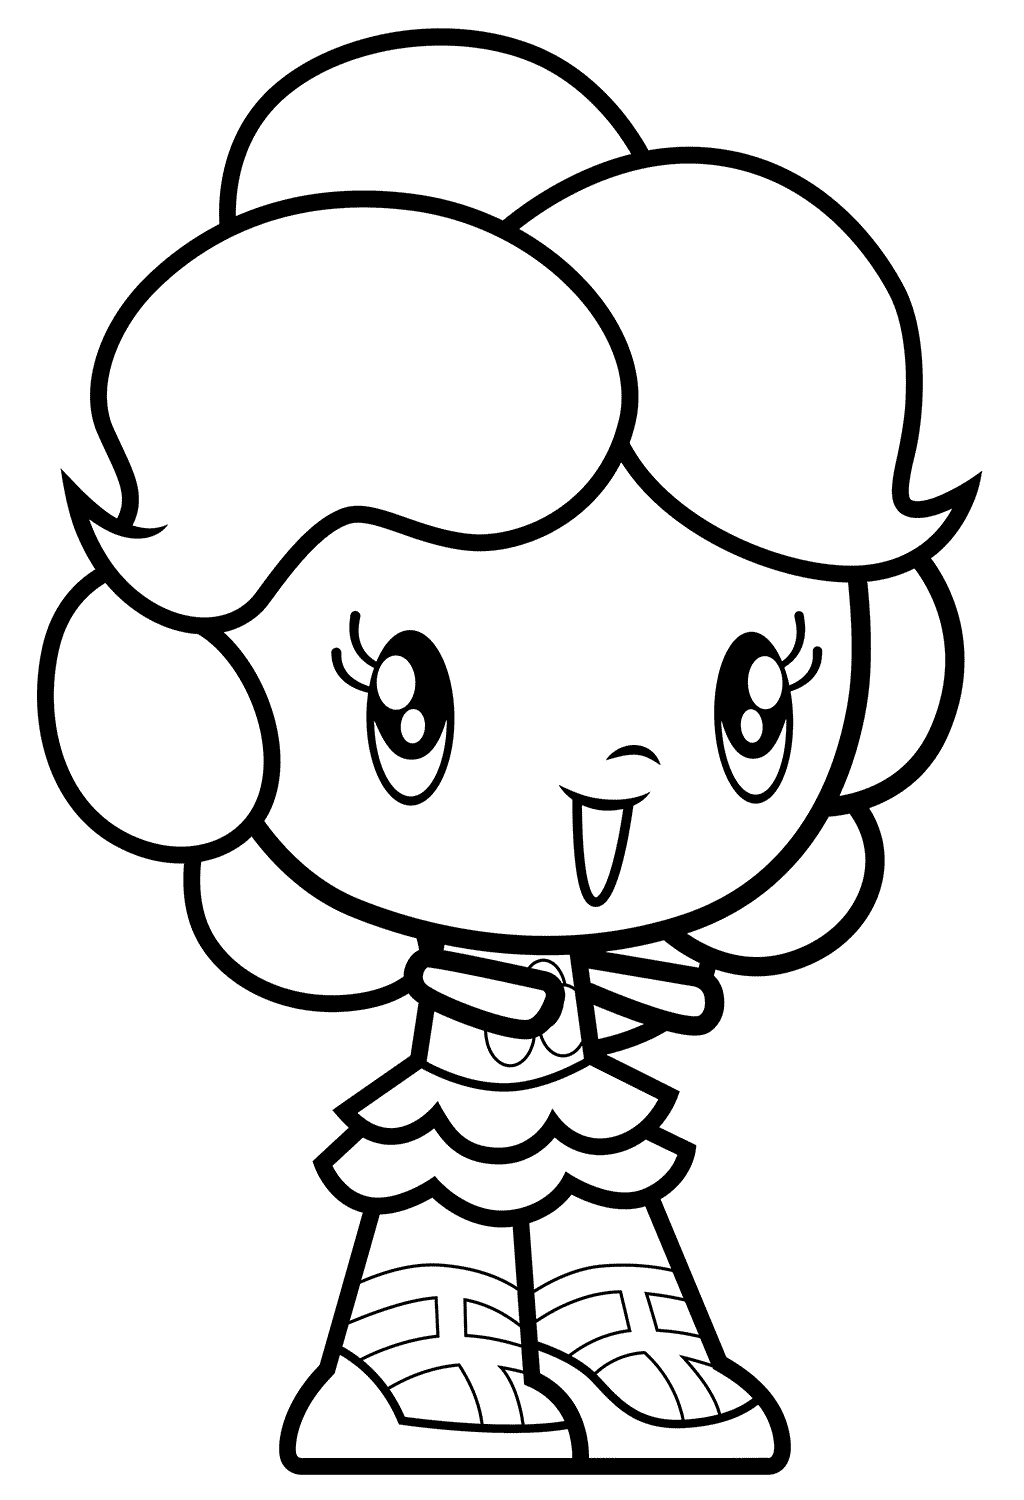 Pinkie Pie Equestria Girl Coloring Page